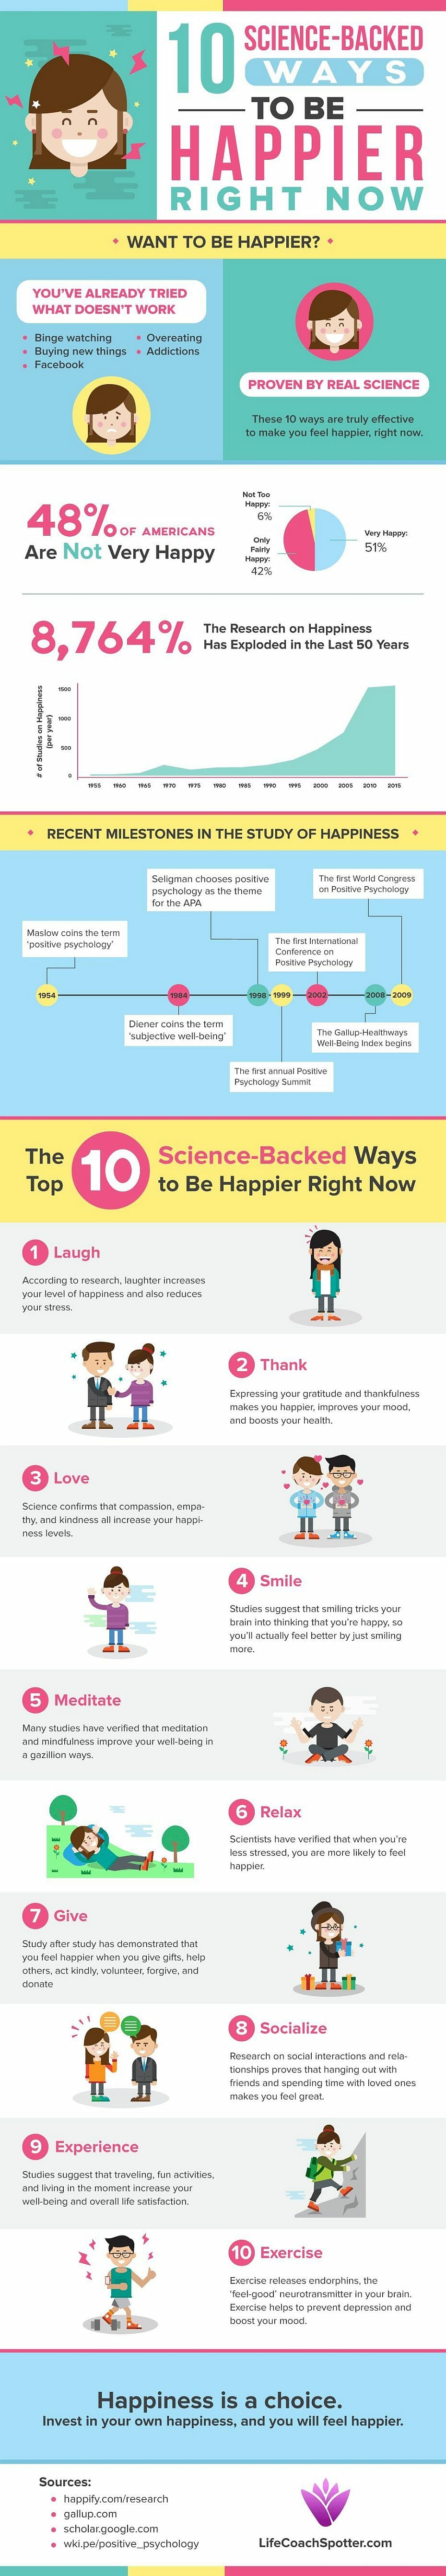 How to Be Happier Almost Instantly | Personal Growth Web